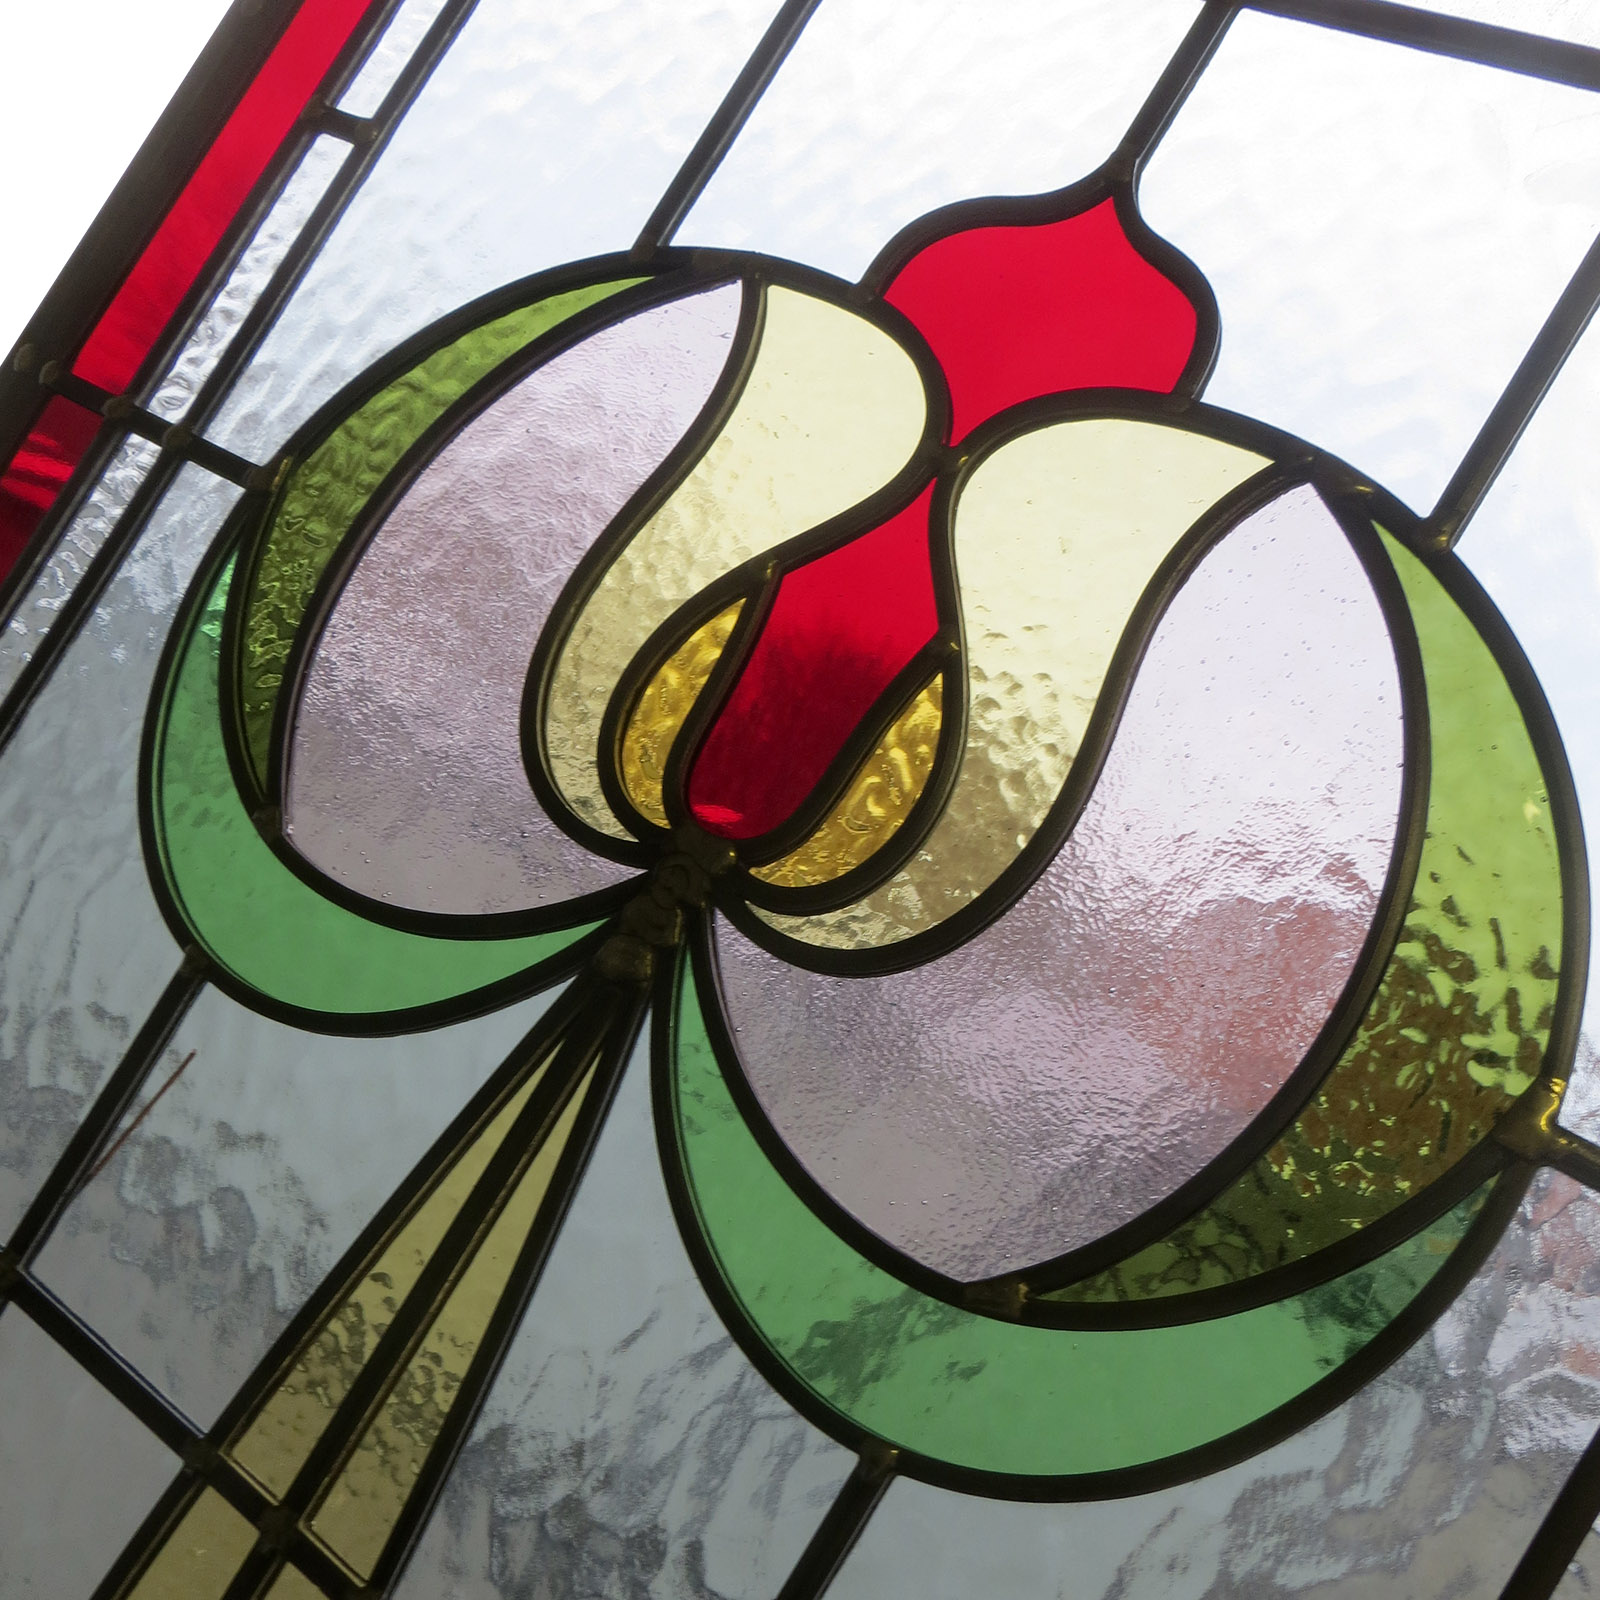 Art Nouveau Tulip Stained Glass